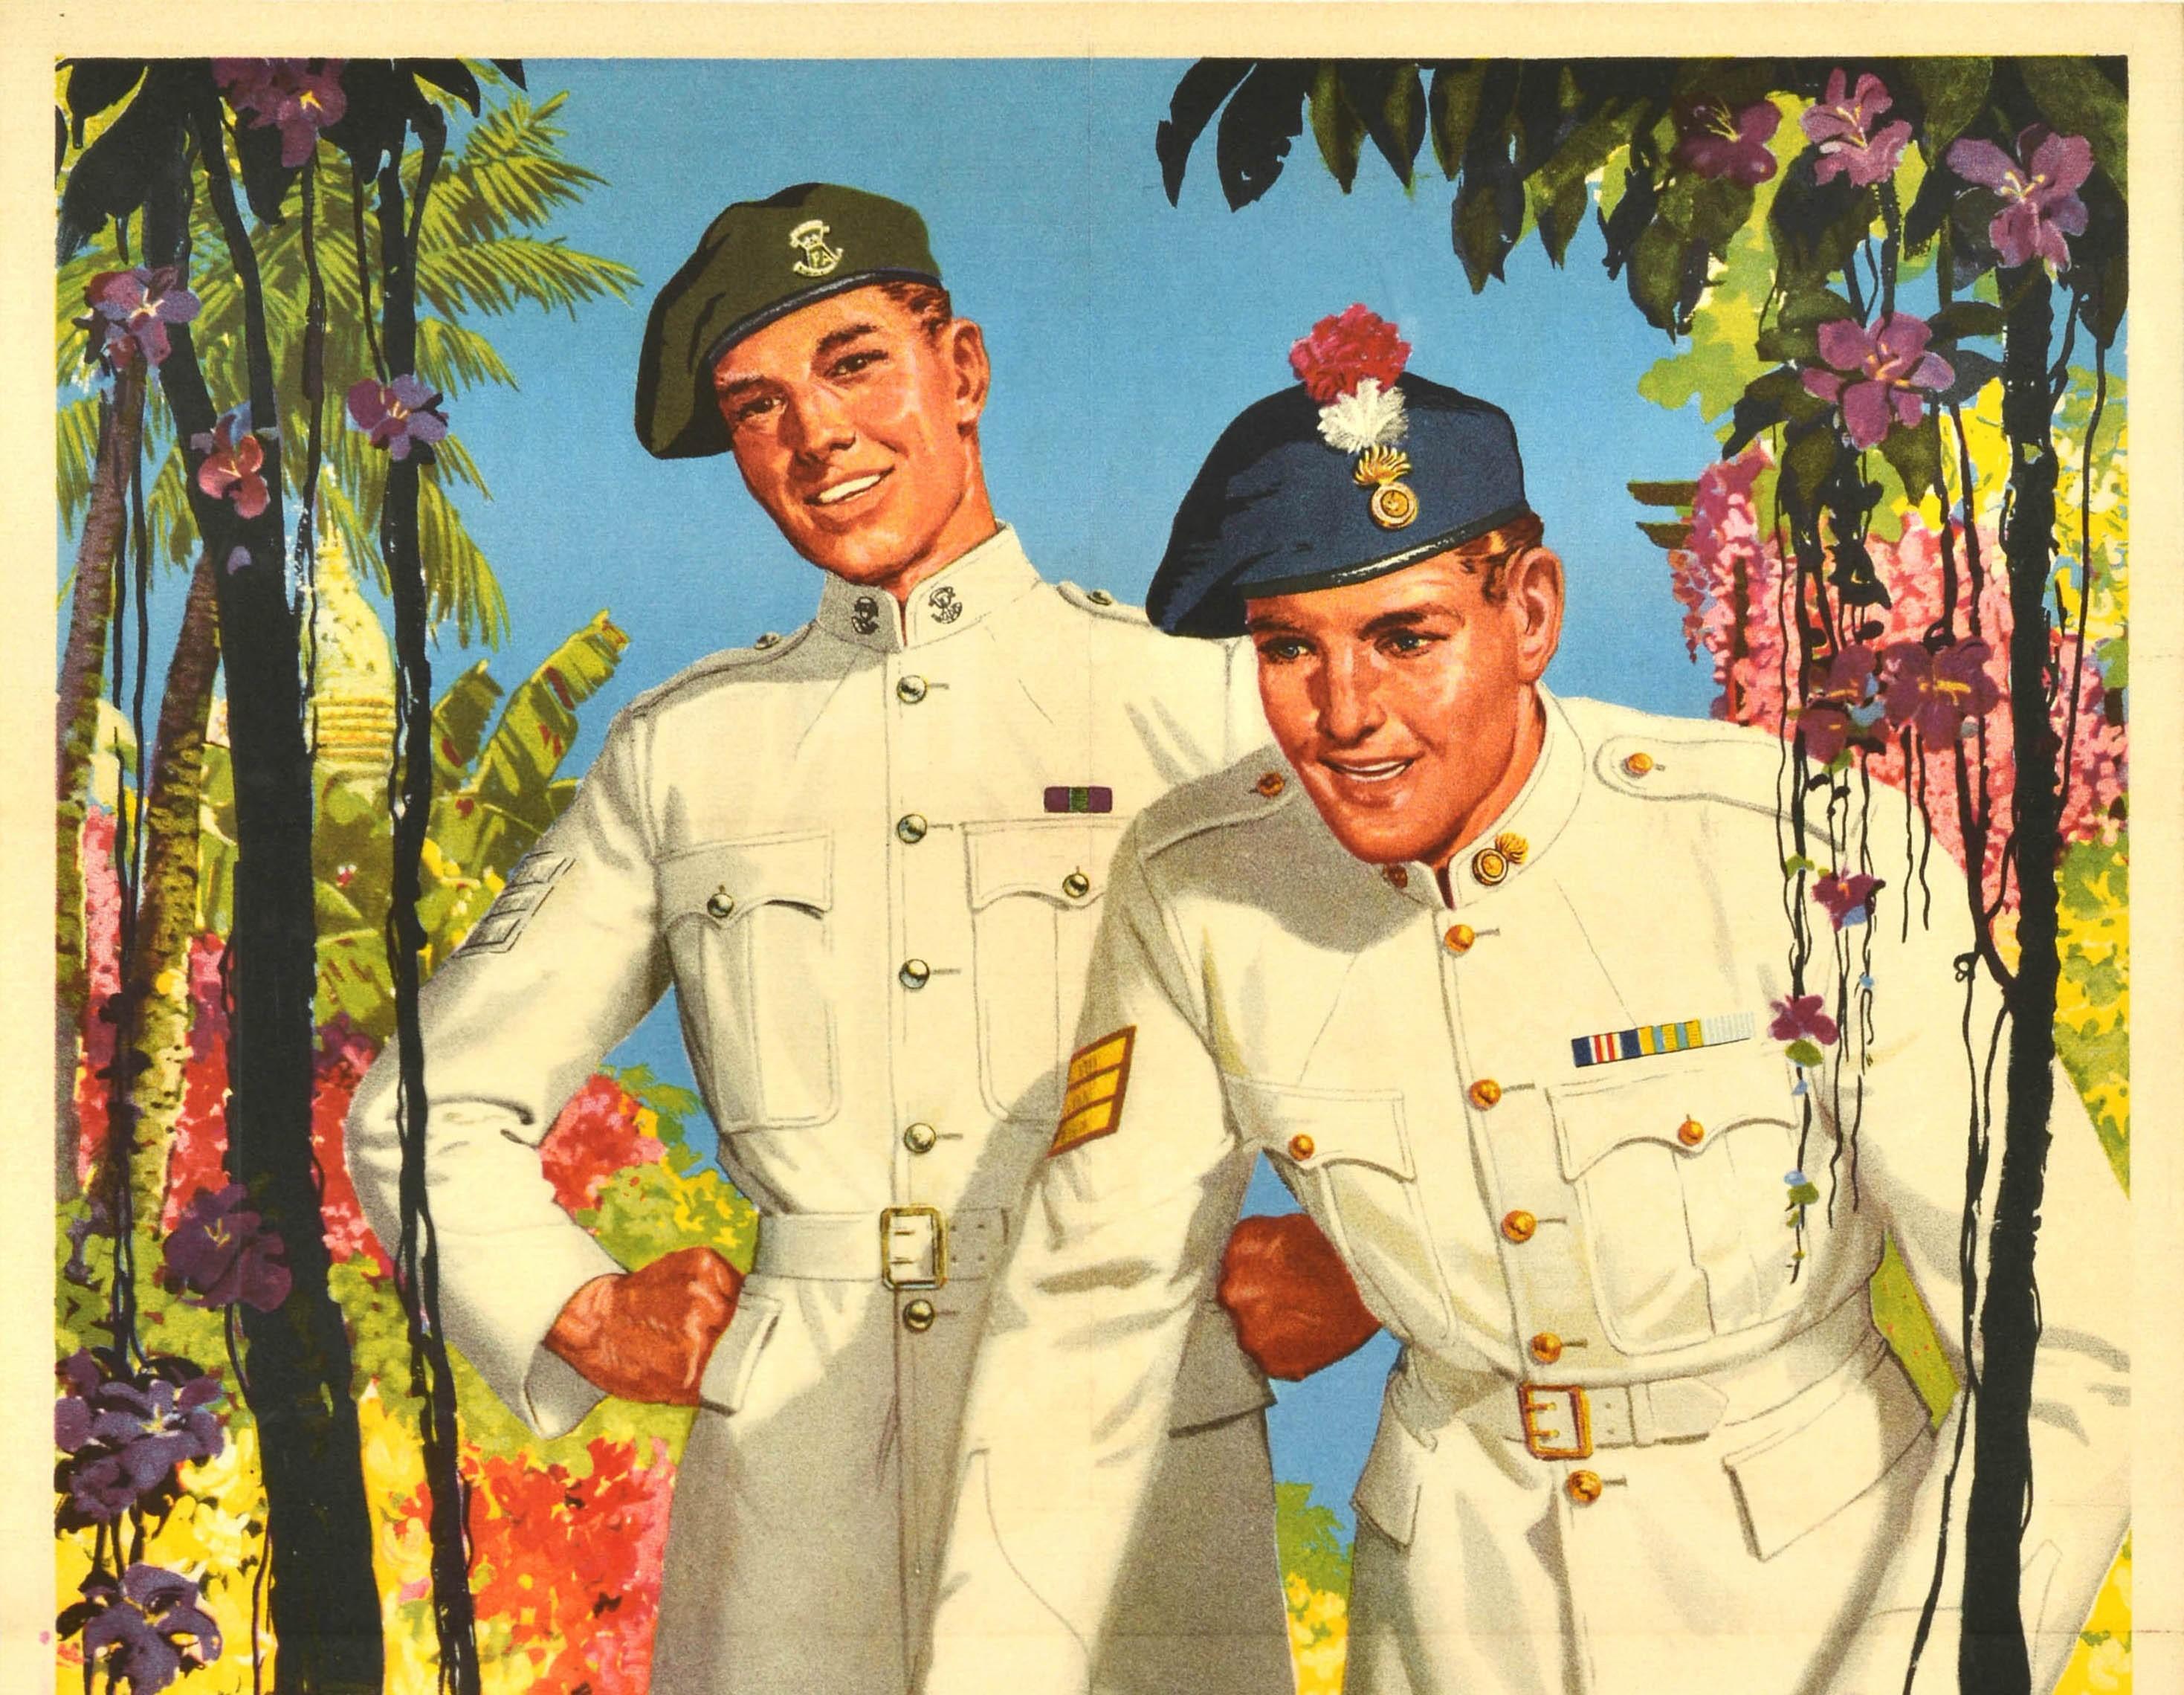 Original vintage British military recruitment poster - See it all ... in the Regular Army and you can join at 17½ - featuring an illustration of two soldiers from the Royal Regiment of Fusiliers and British Light Infantry wearing white uniforms and